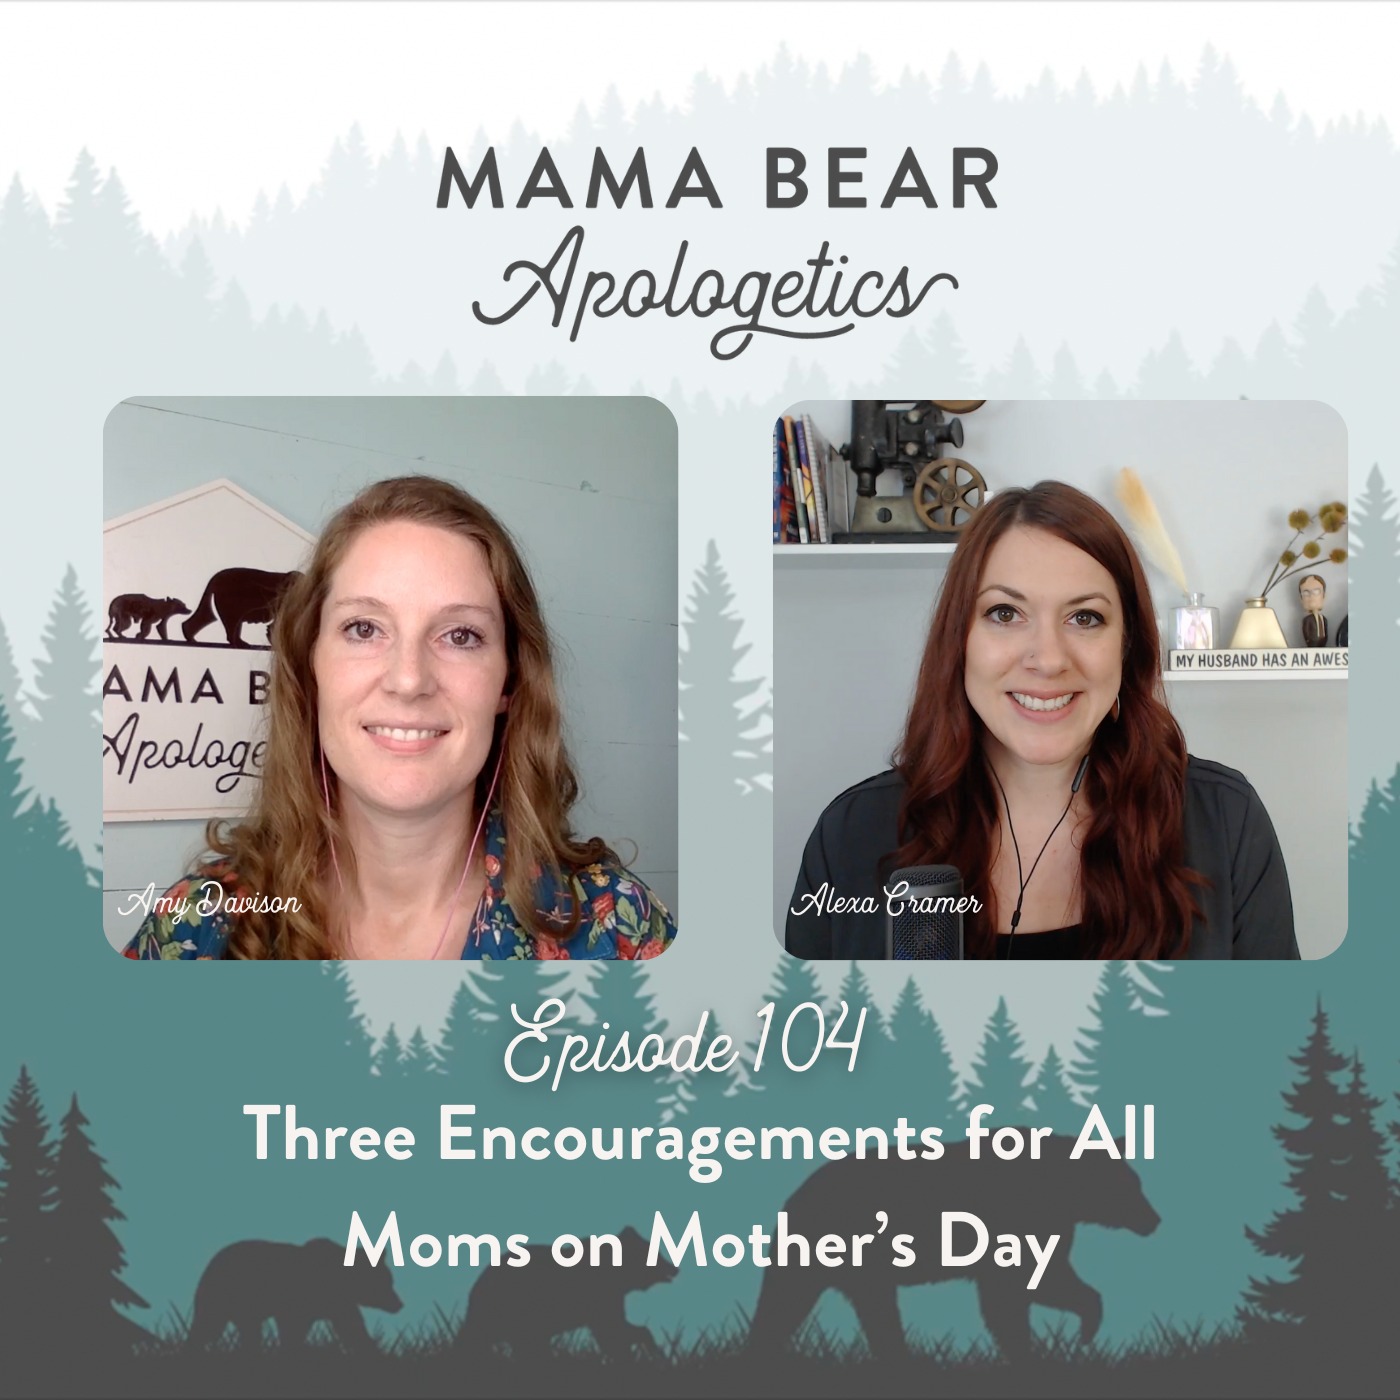 Episode 104. Three Encouragements for All Moms on Mother’s Day